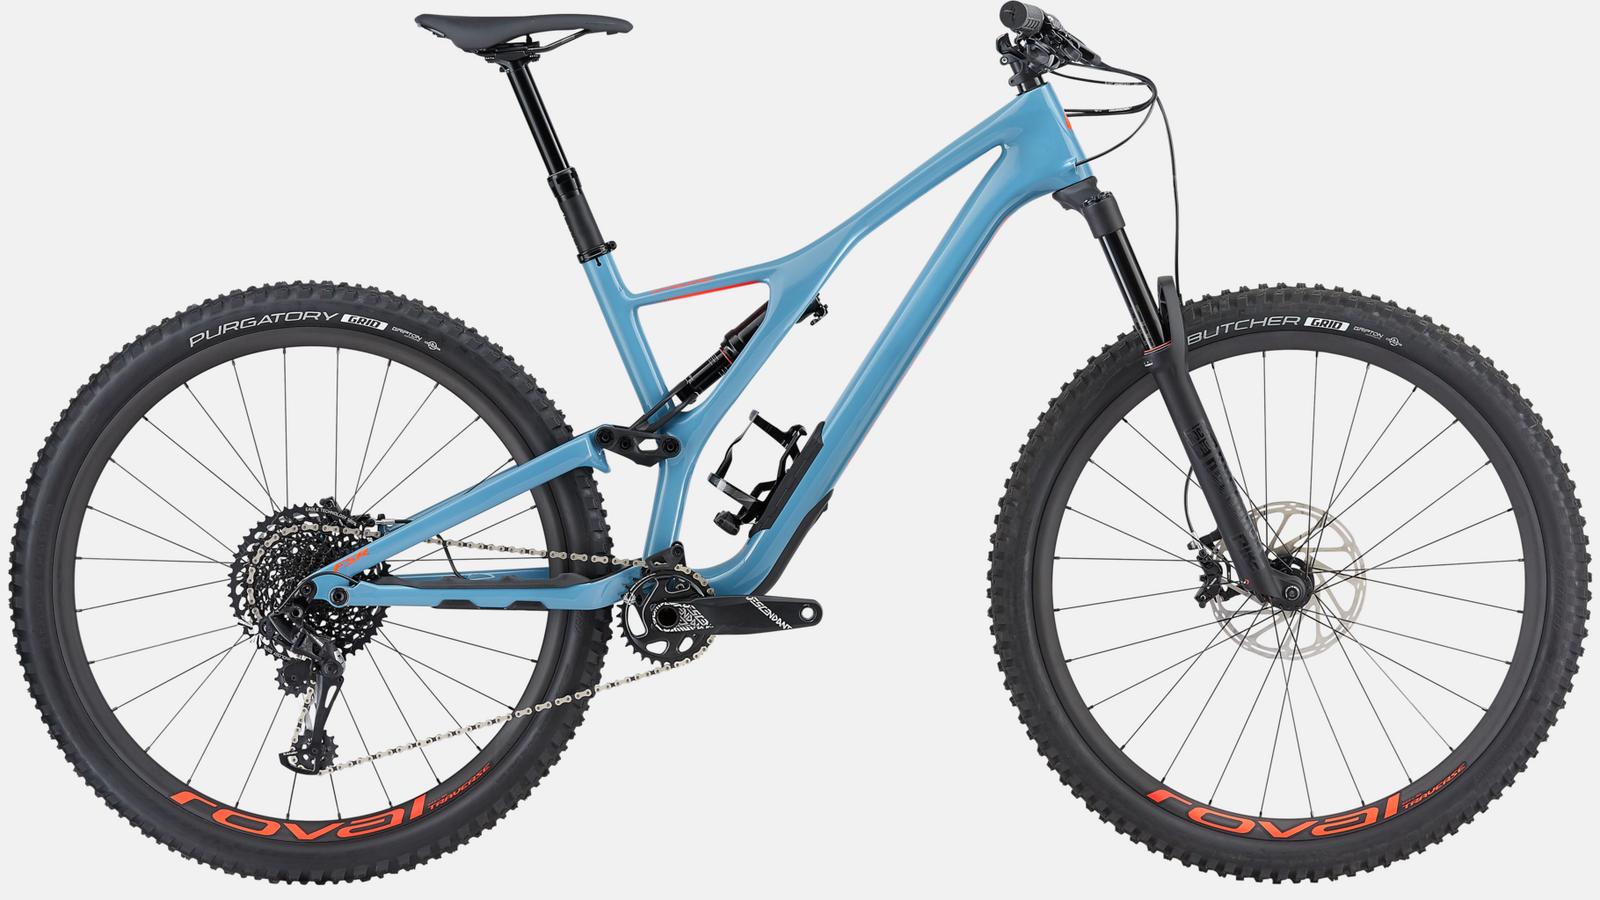 Paint for 2018 Specialized Men's Stumpjumper Expert 29 - Gloss Storm Grey